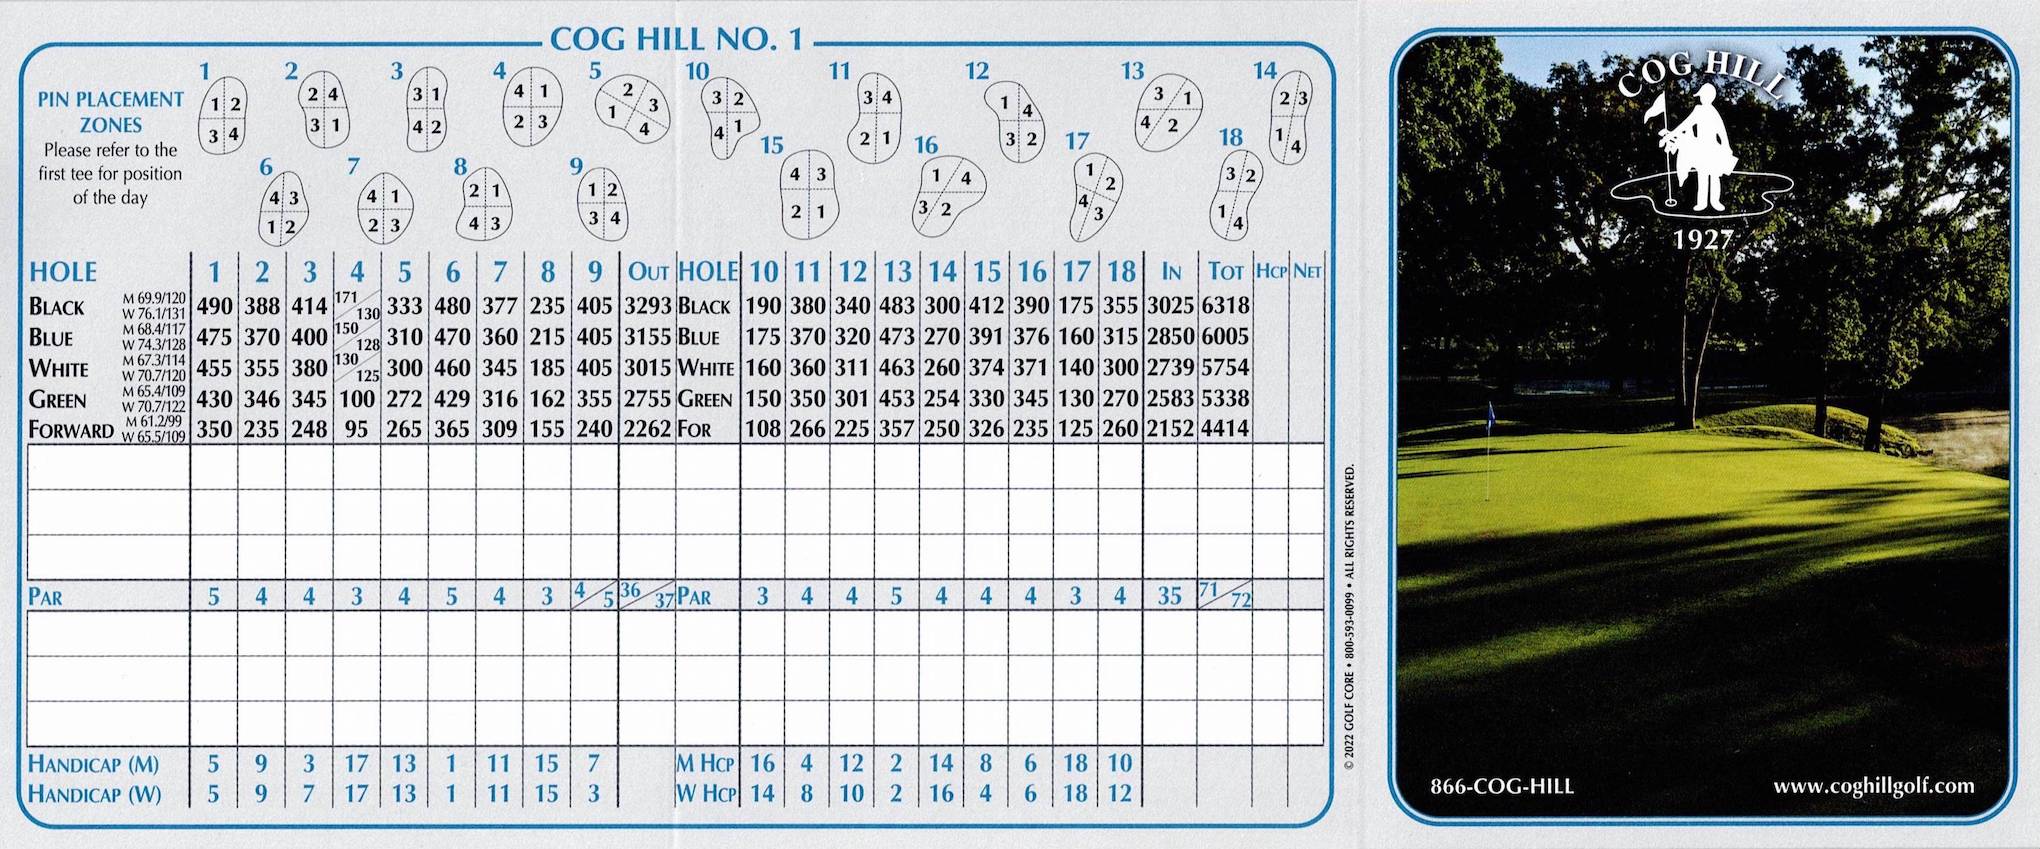 Scan of the scorecard from Cog Hill Course #1 in Lemont, Illinois. Note that hole 4 has two completely separate greens and tee box areas, and can be played at a wide variety of distances as a result. Also, hole 9 can be played as a par 4 or 5.